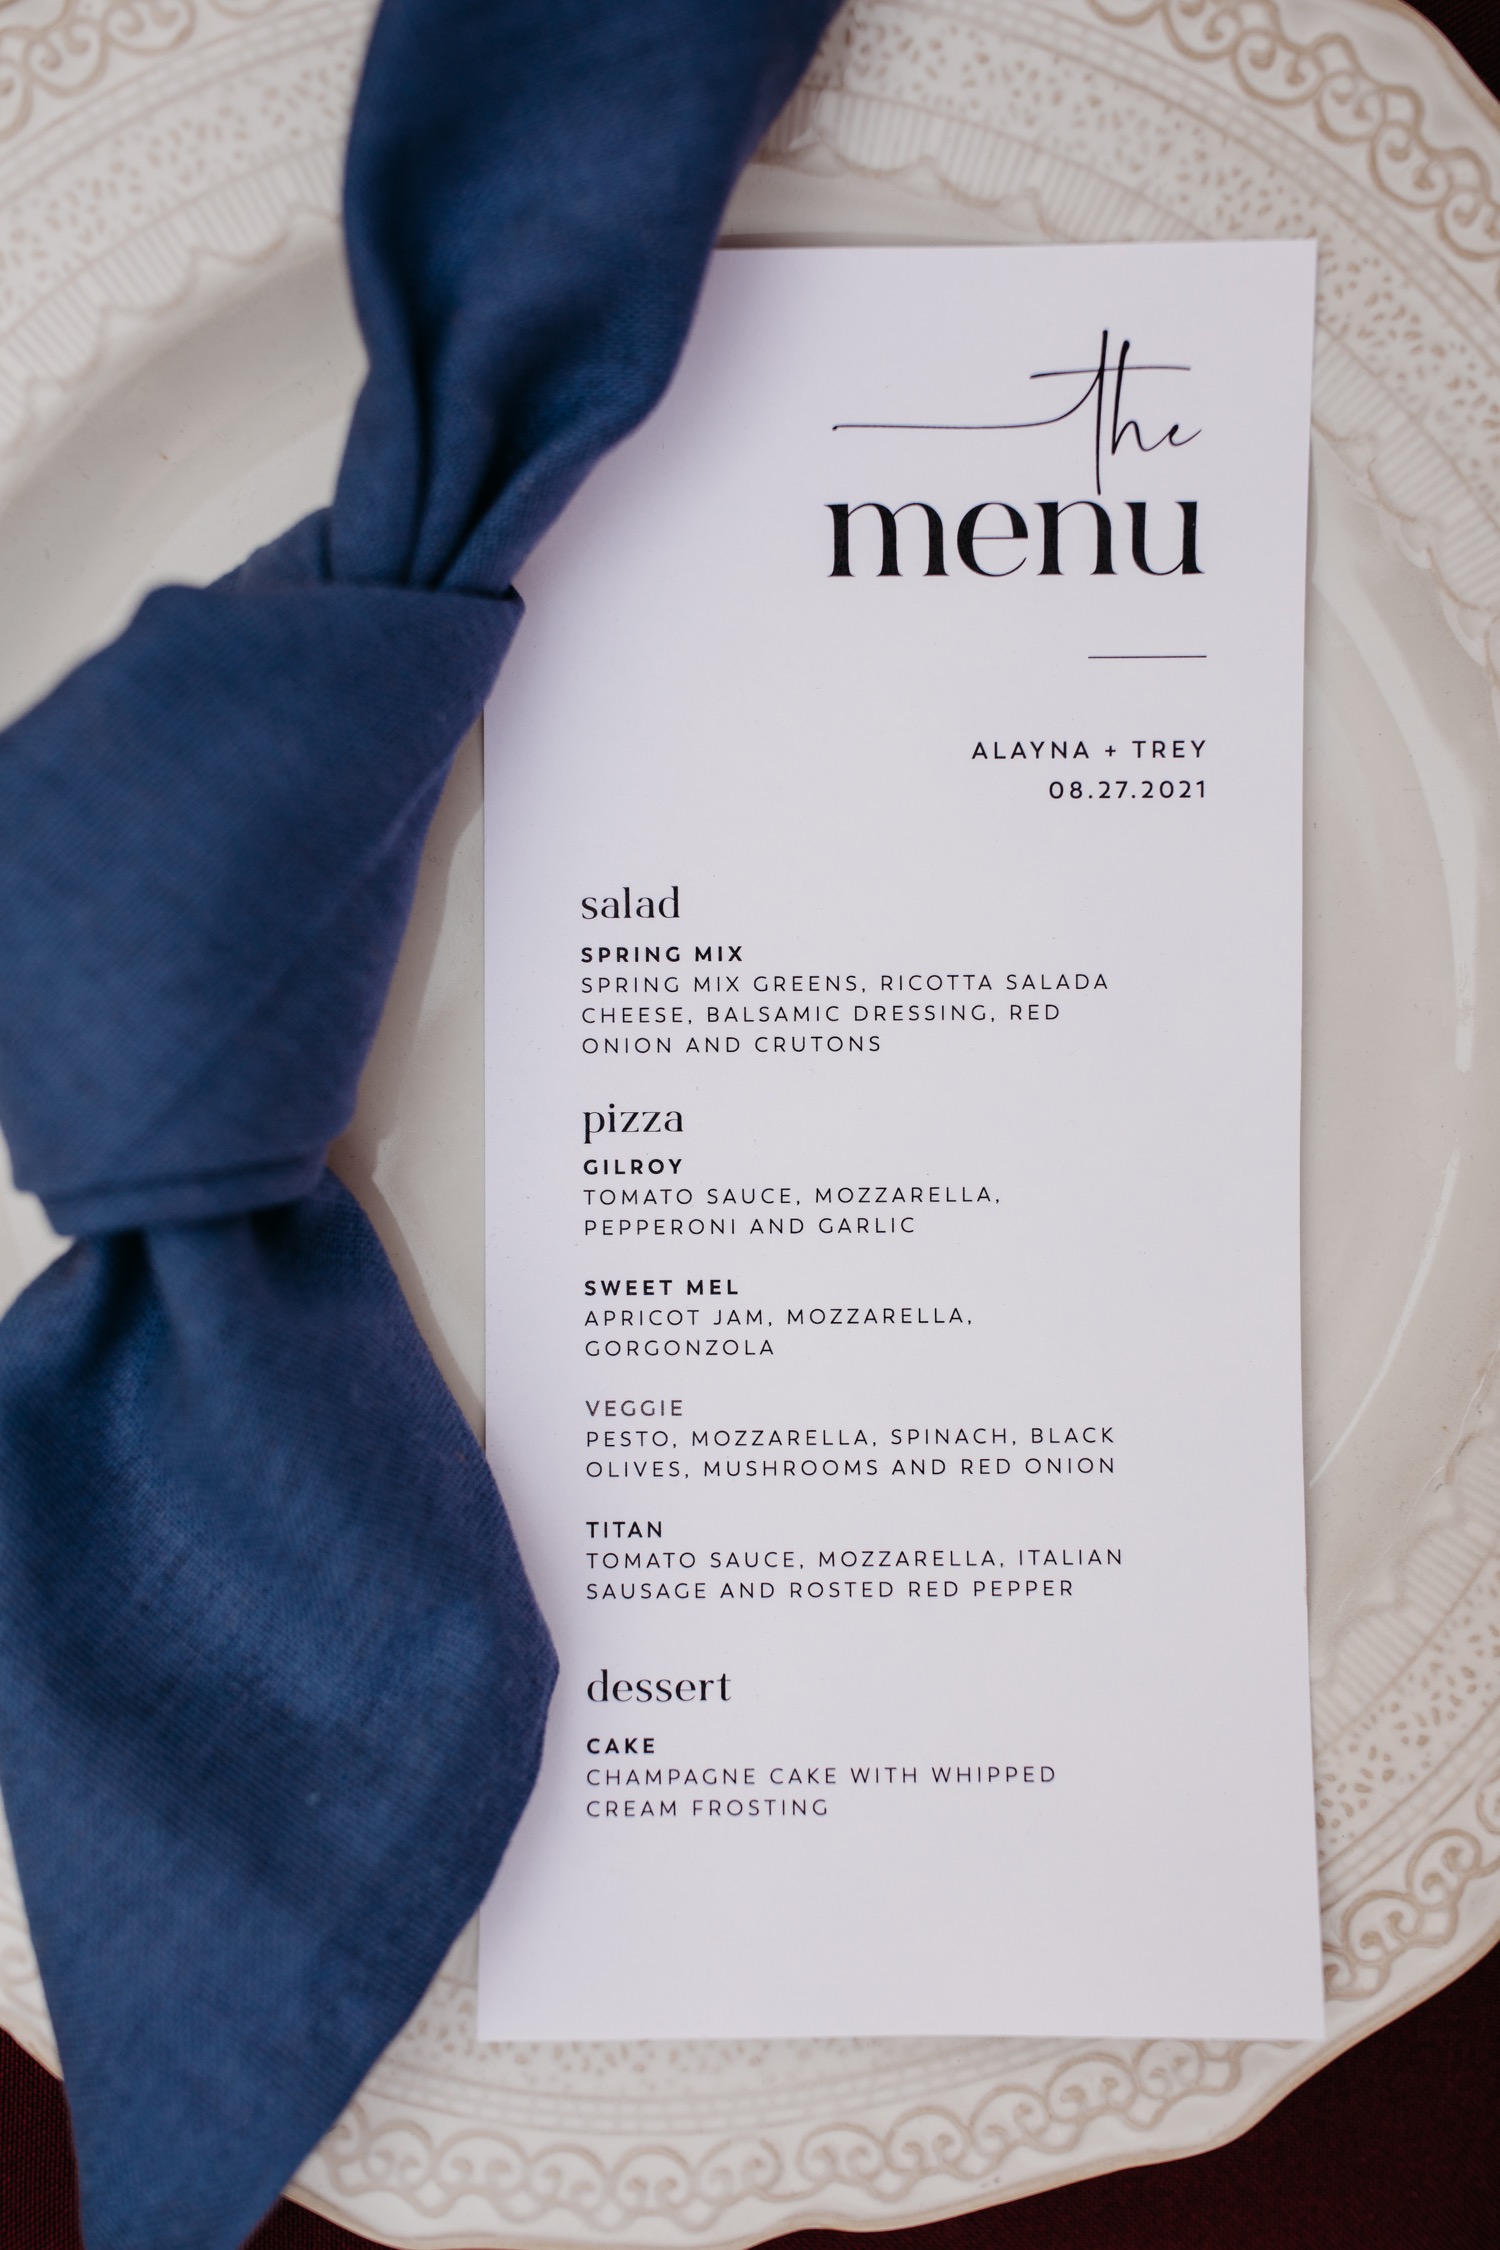 Dinner menu on plate with a blue napkin for Alayna and Trey's wedding at The Maples in Woodland, CA